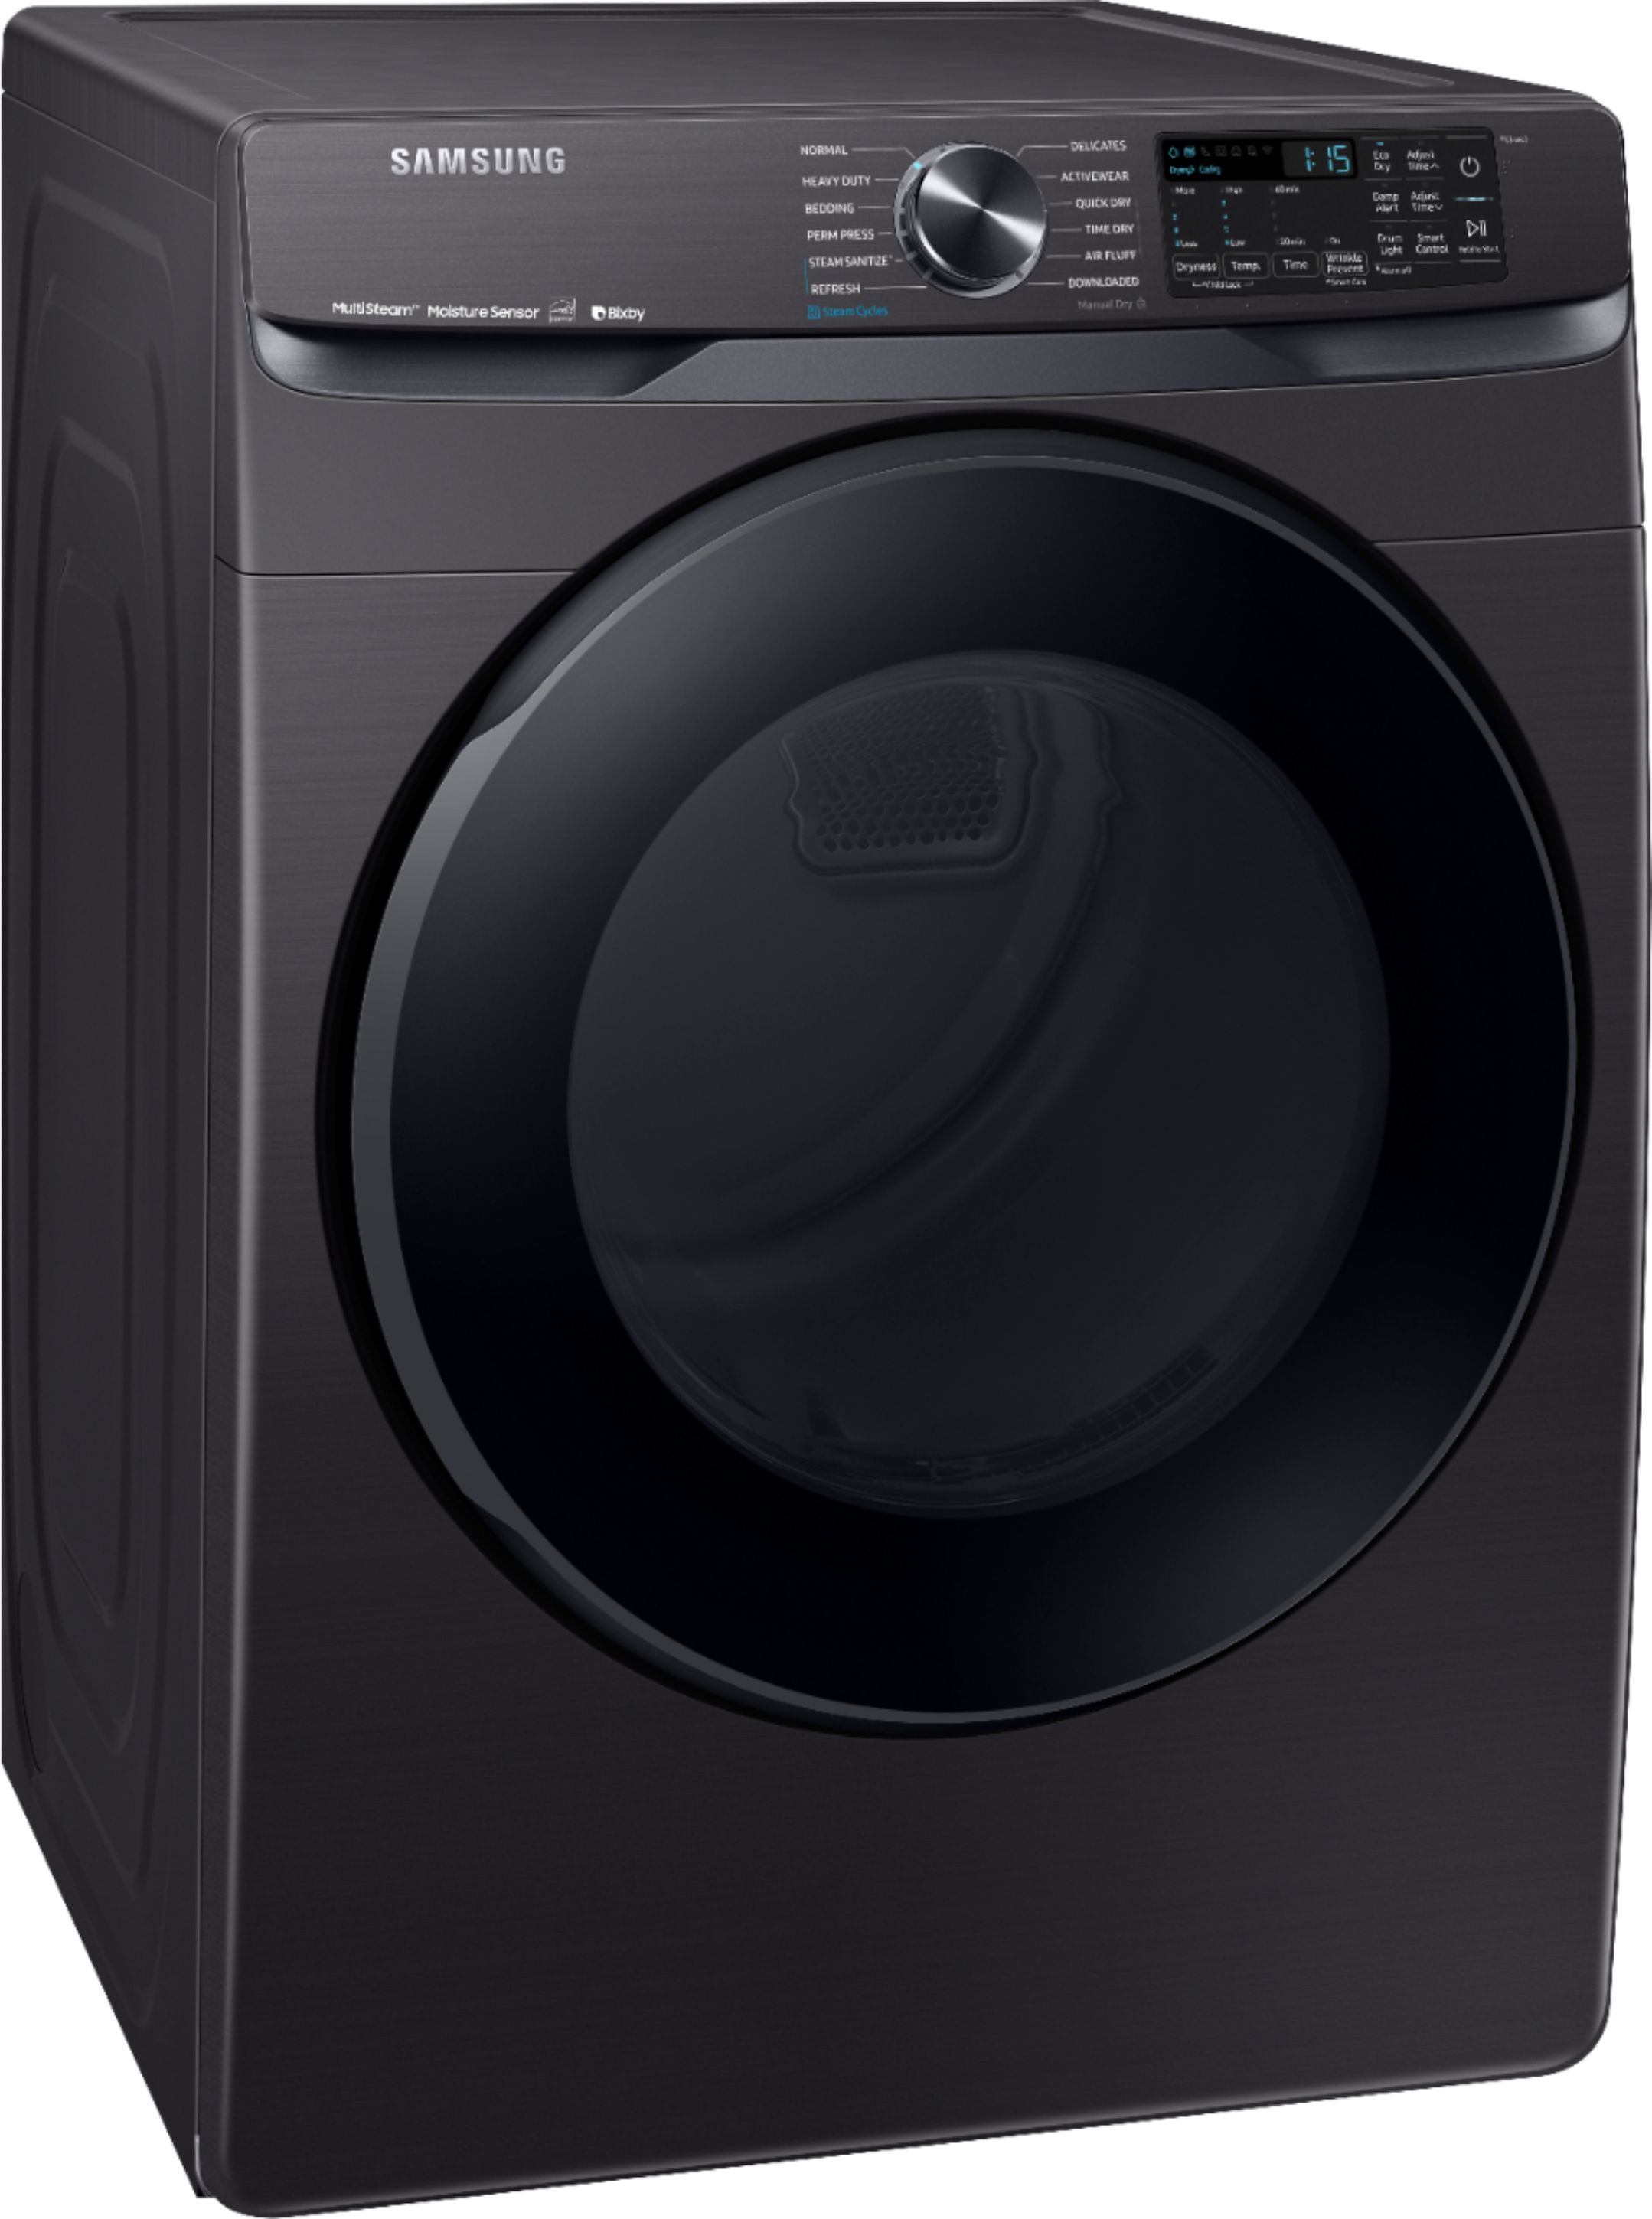 Angle View: Samsung - 7.5 Cu. Ft. Stackable Smart Gas Dryer with Super Speed Dry - Brushed black